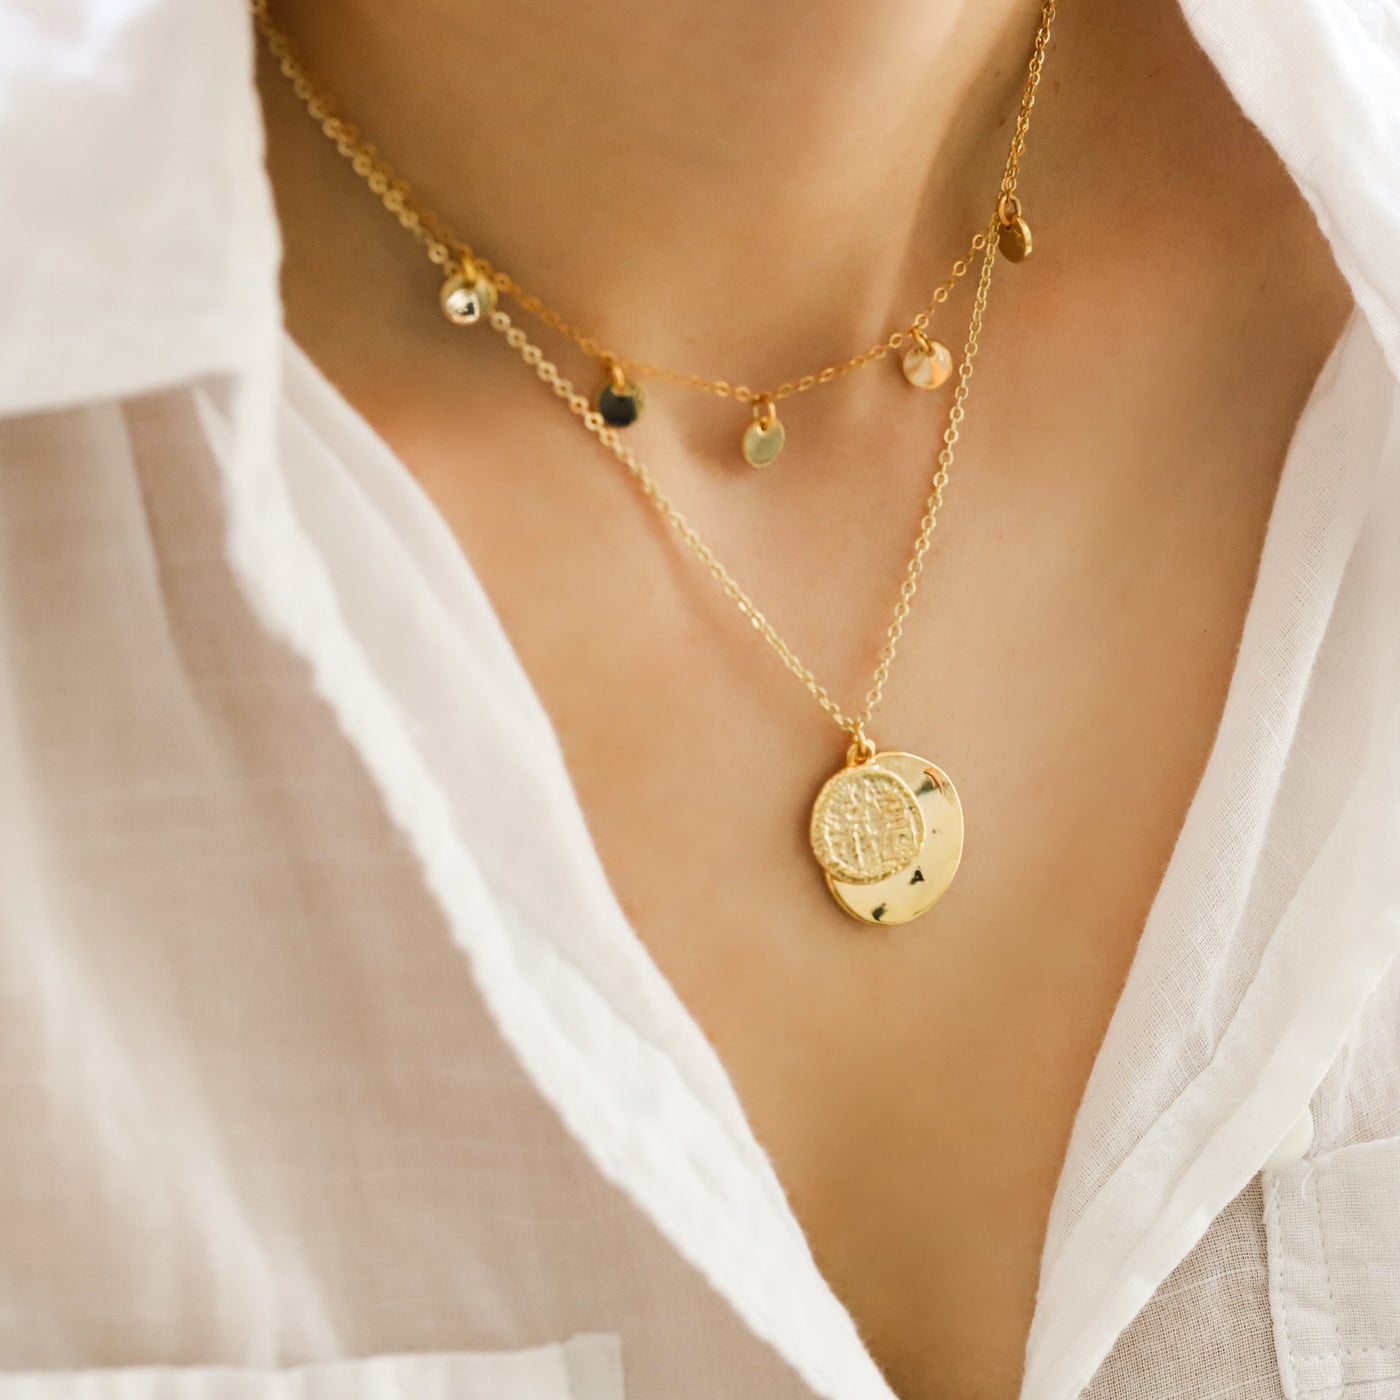 14K gold filled choker necklace and coin pendant necklace